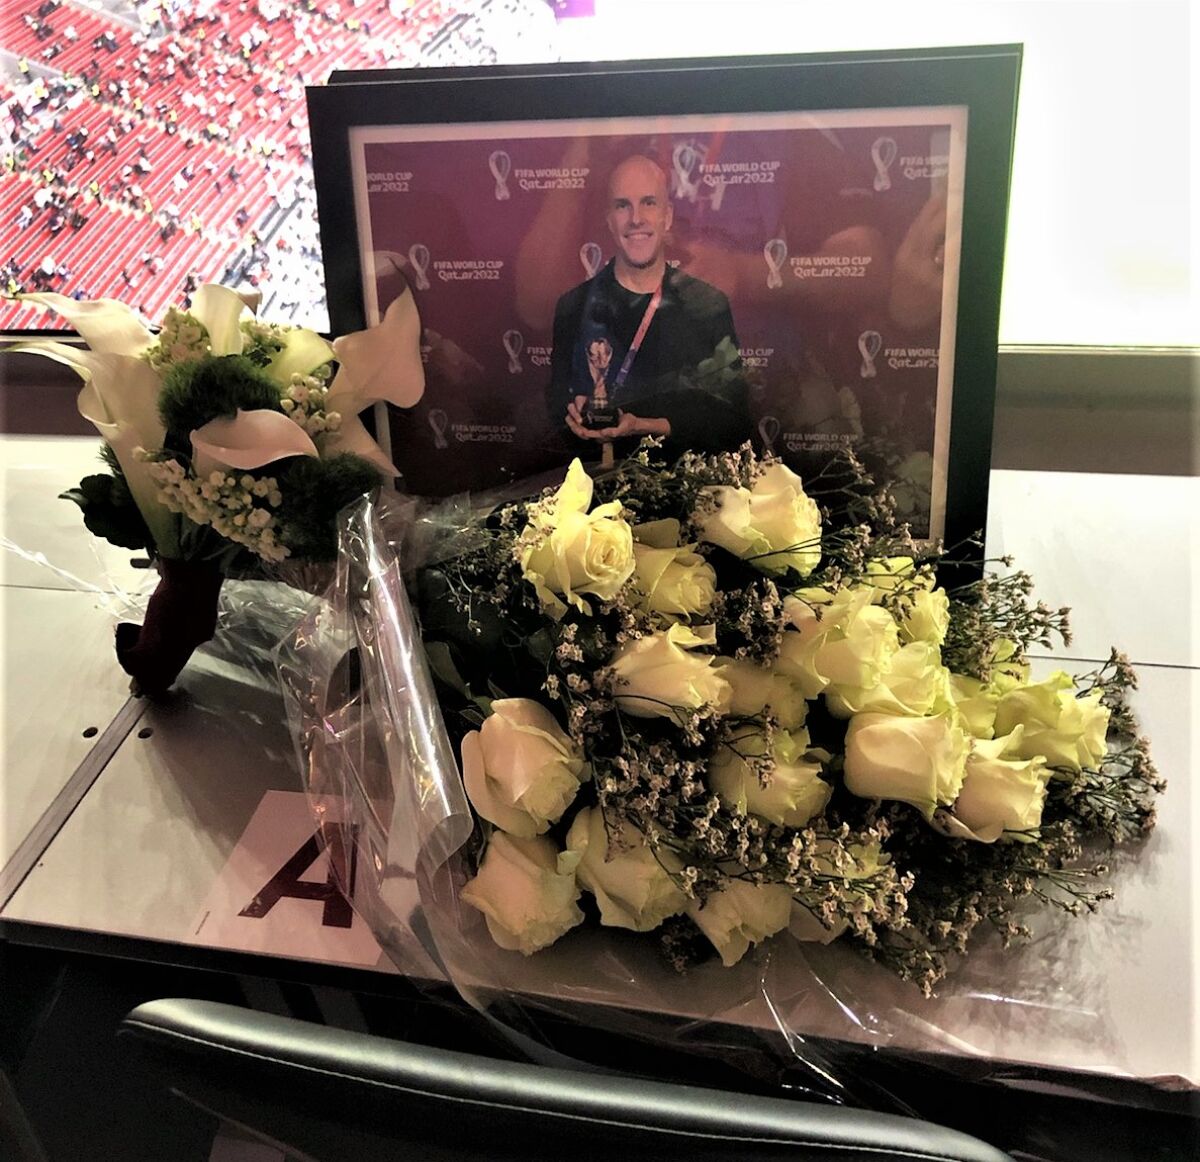 FIFA has placed flowers and a photo in honor of journalist Grant Wahl at his assigned World Cup headquarters.